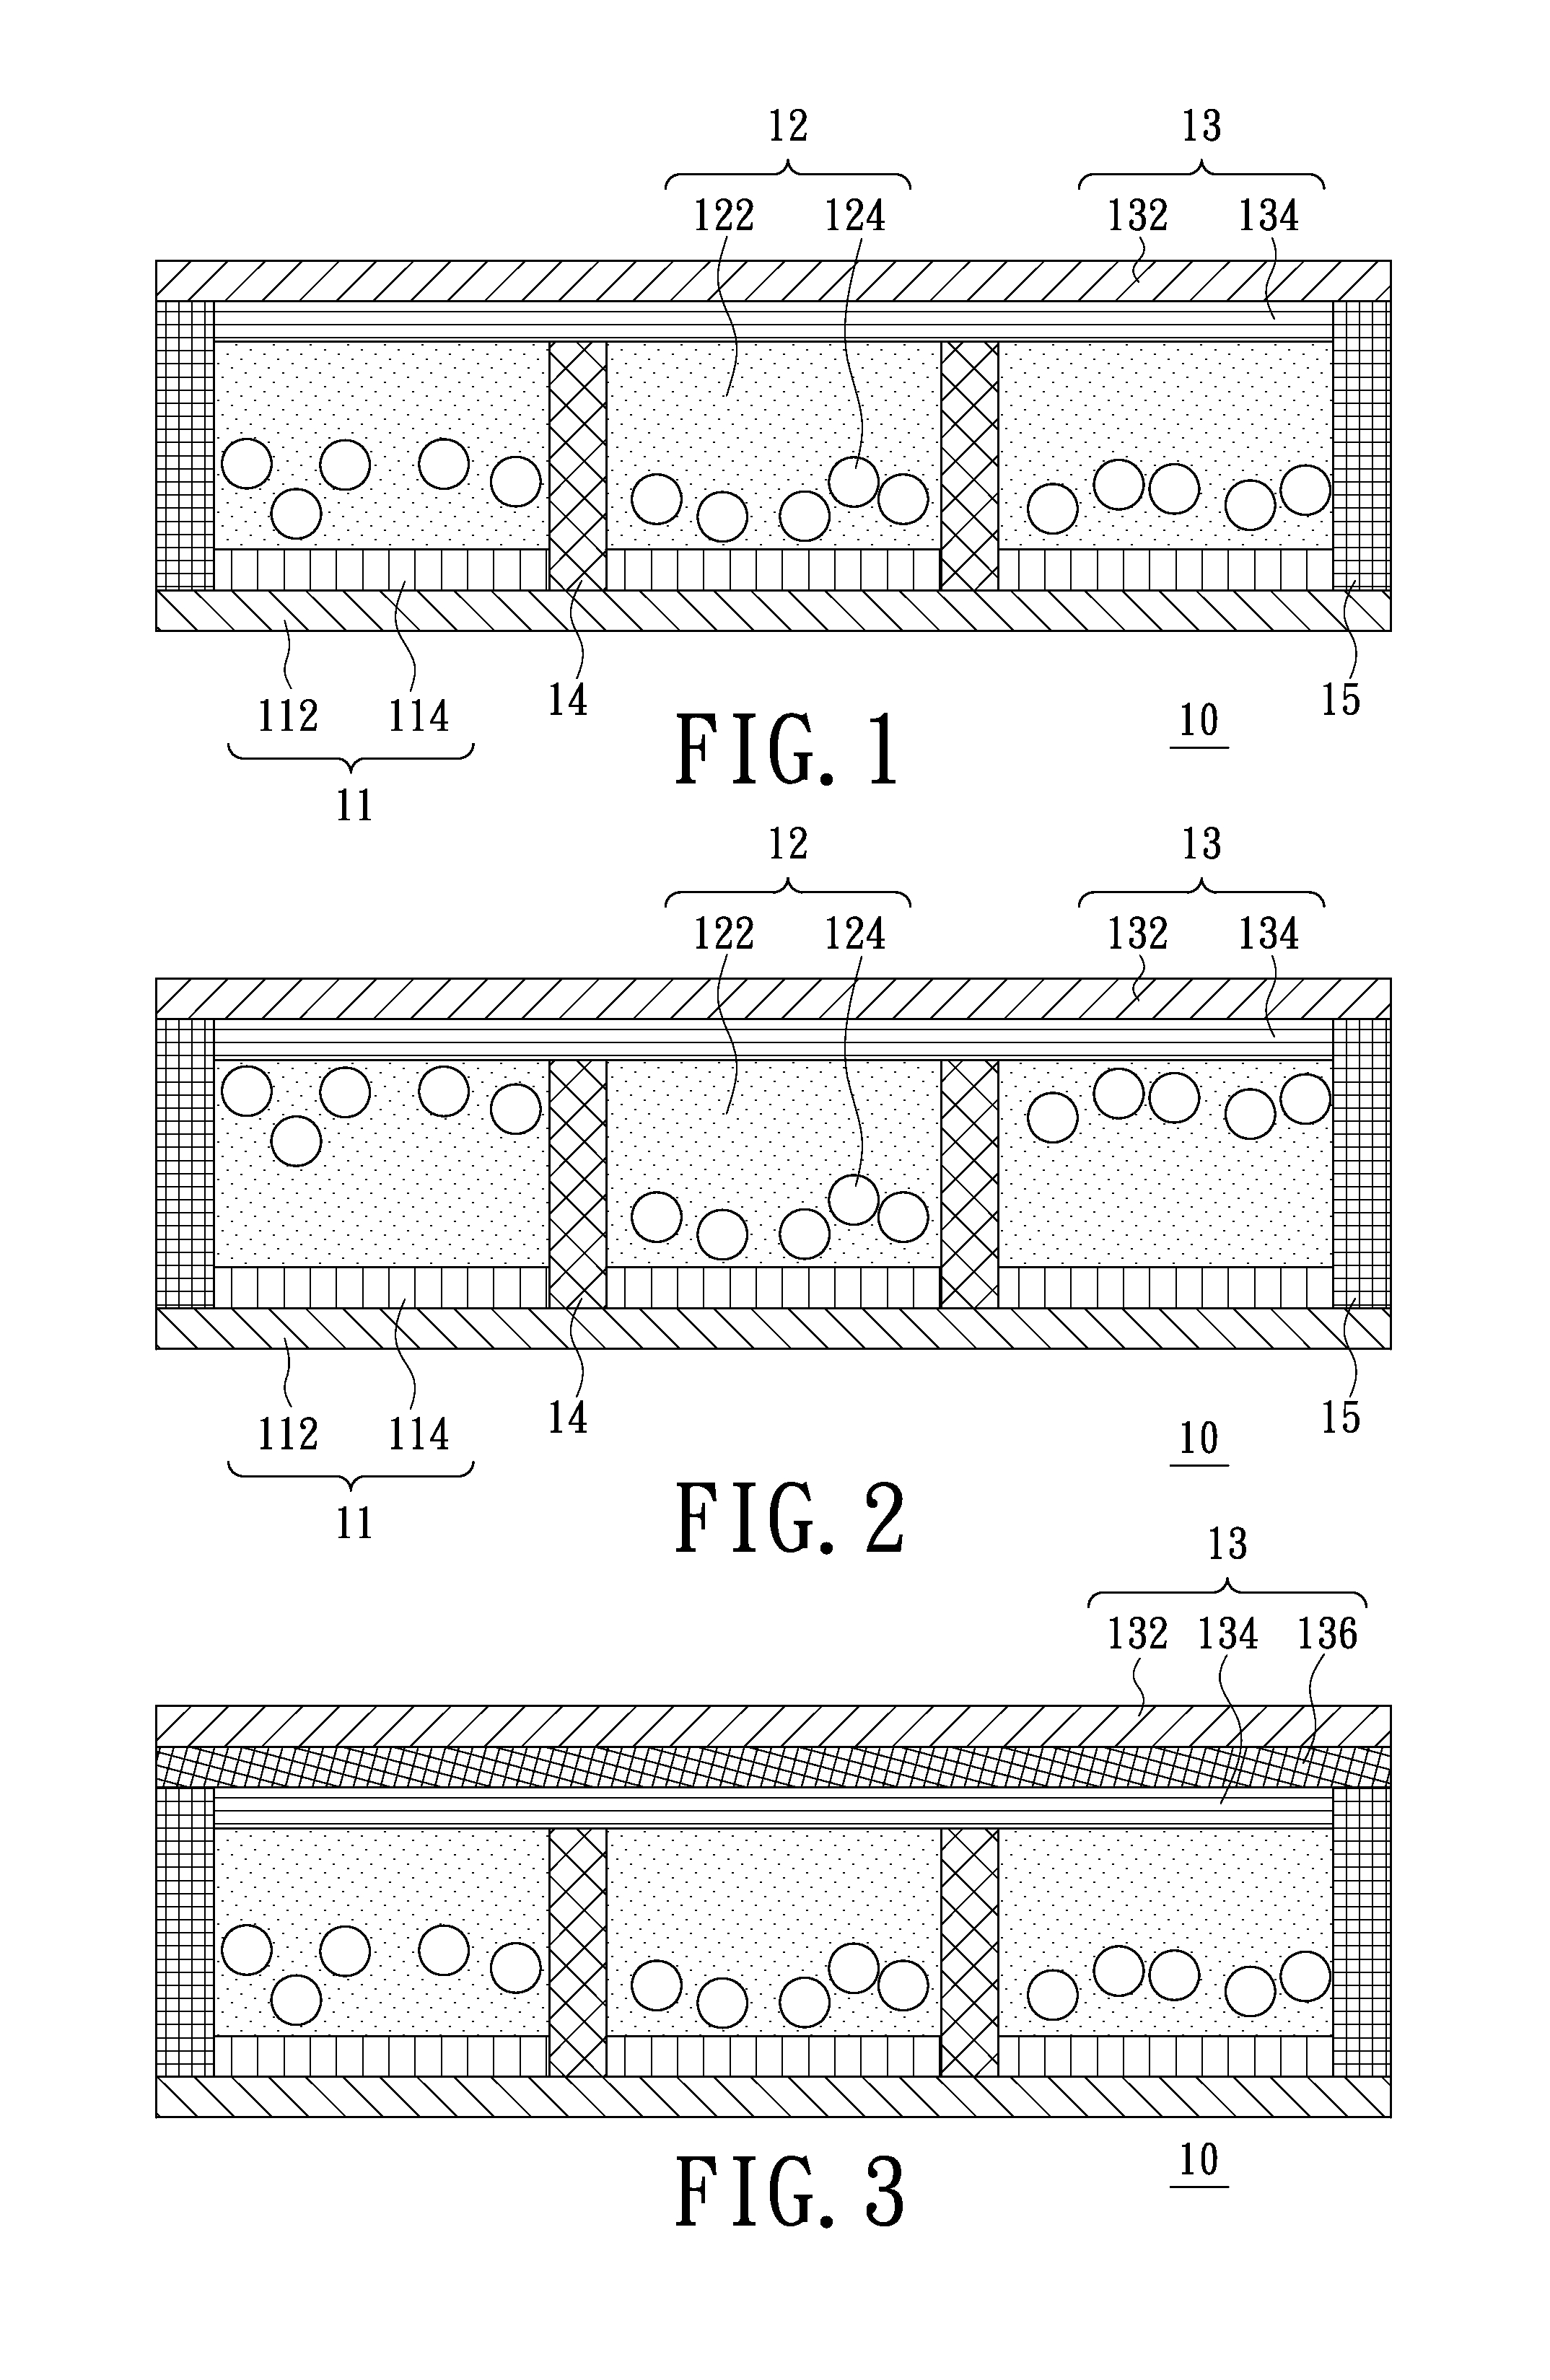 Display device with improved display performance